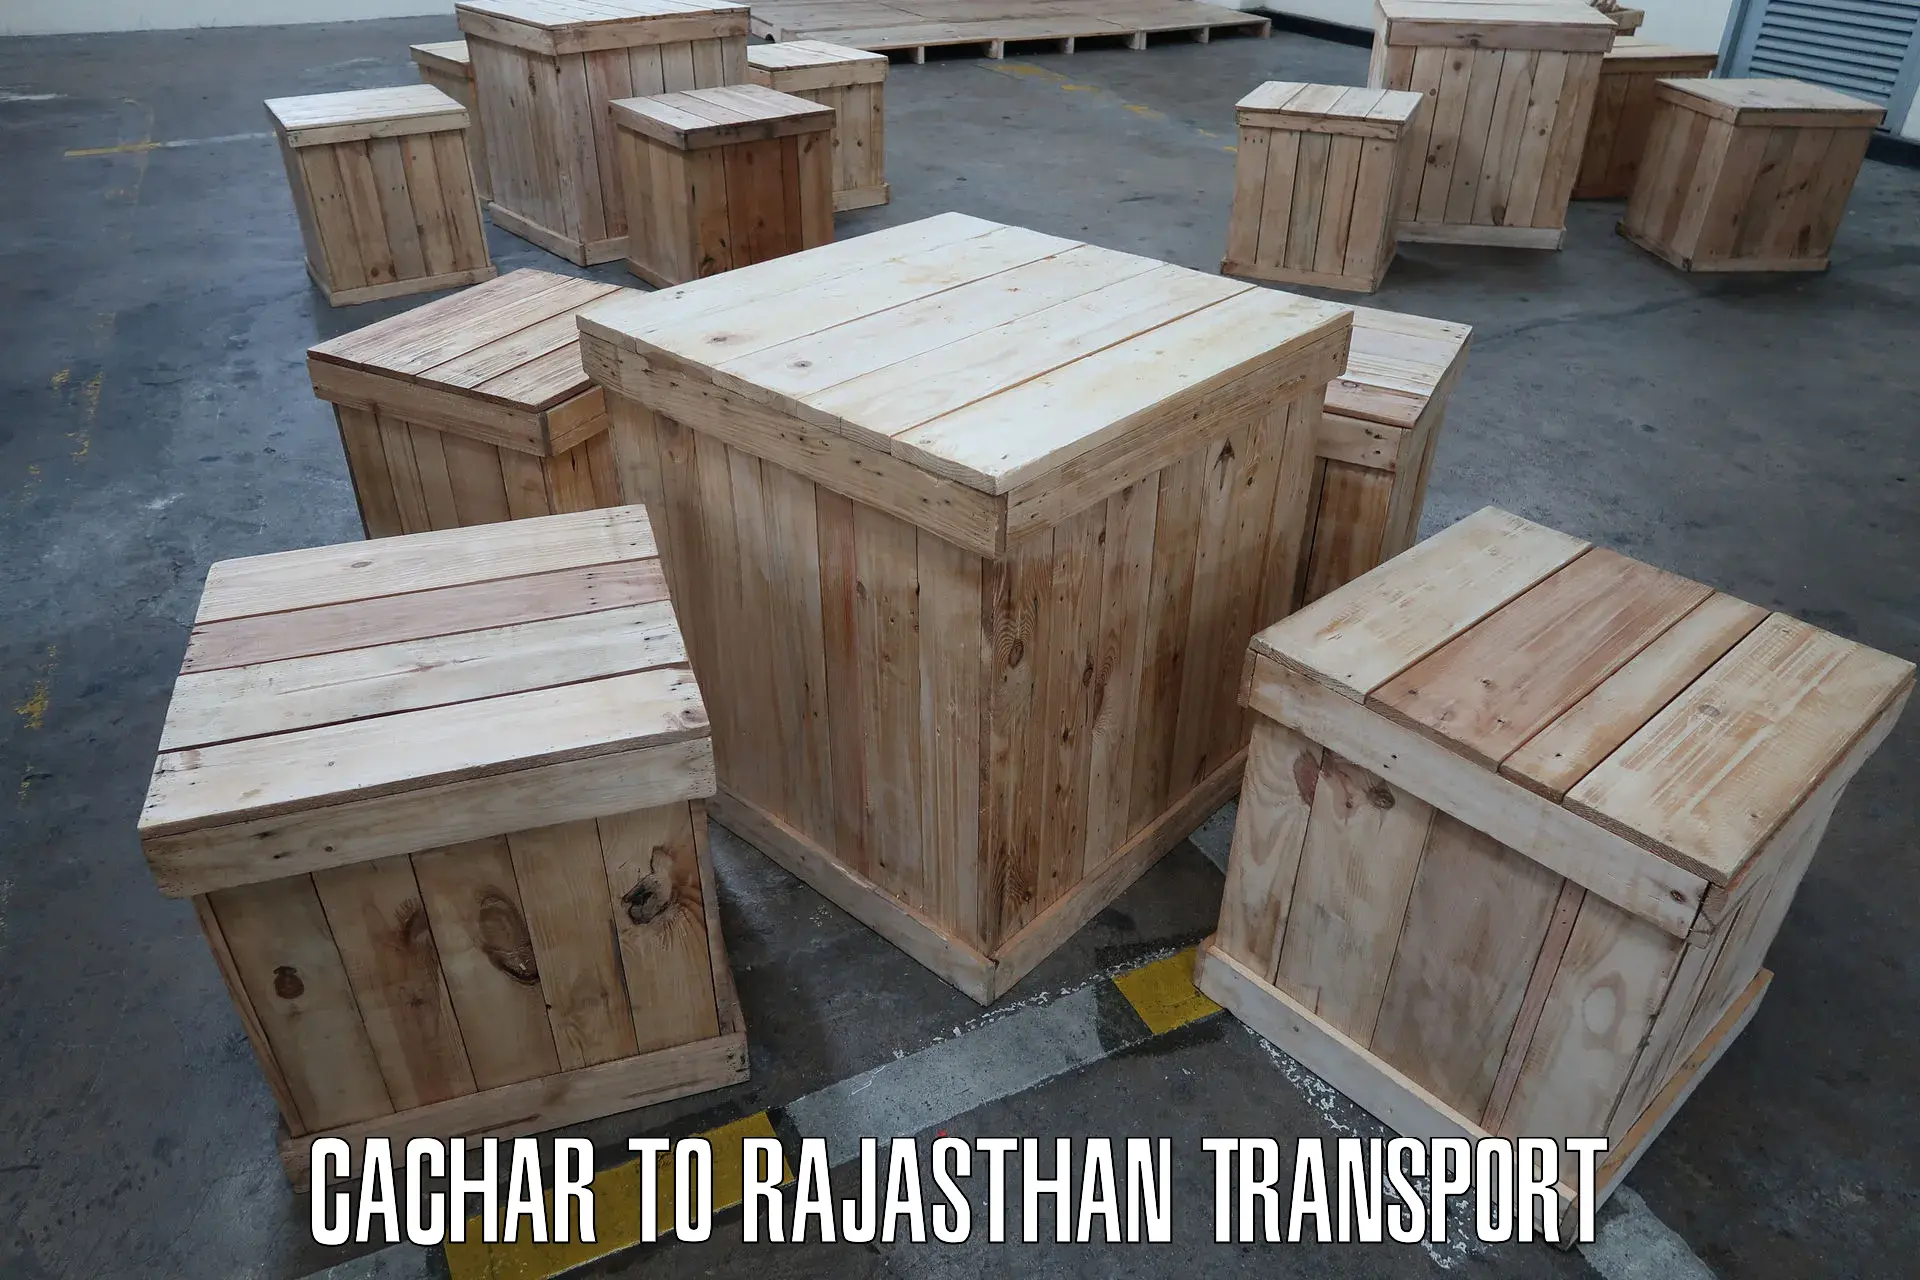 Container transportation services Cachar to Suratgarh